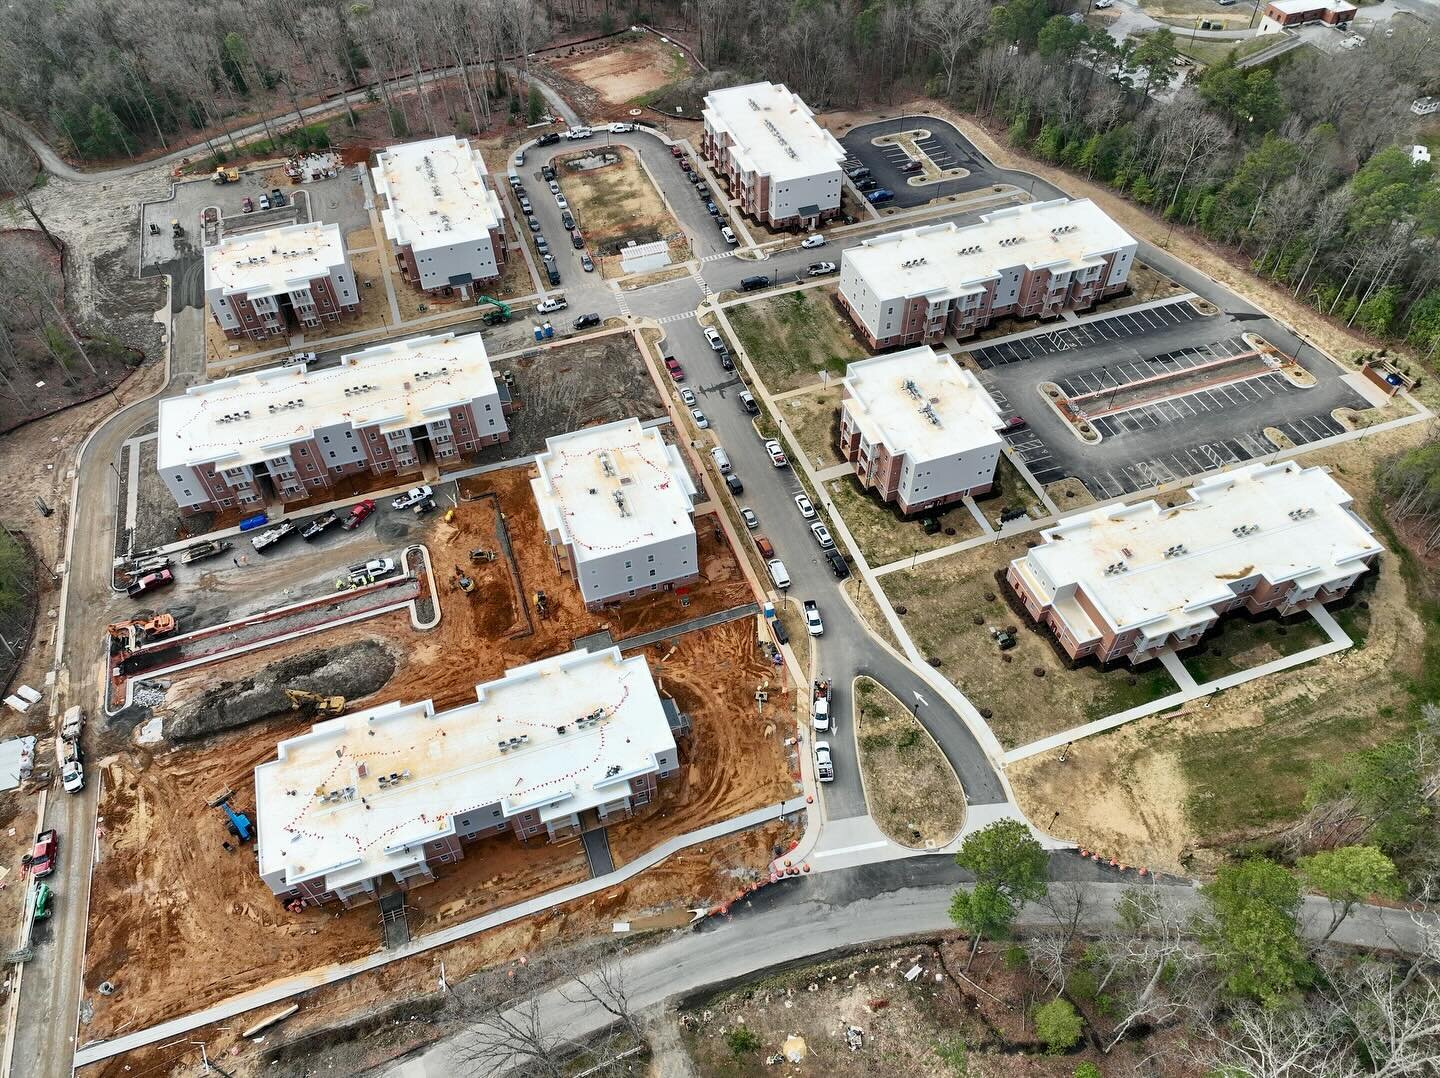 Large Projects - #affordablehousing 

It&rsquo;s time for a Winchester Forest construction update! 🌳🌲

In Phase 1, 3 Buildings have been turned over ahead of schedule with occupancy! The last and final building will be turned over within the next w